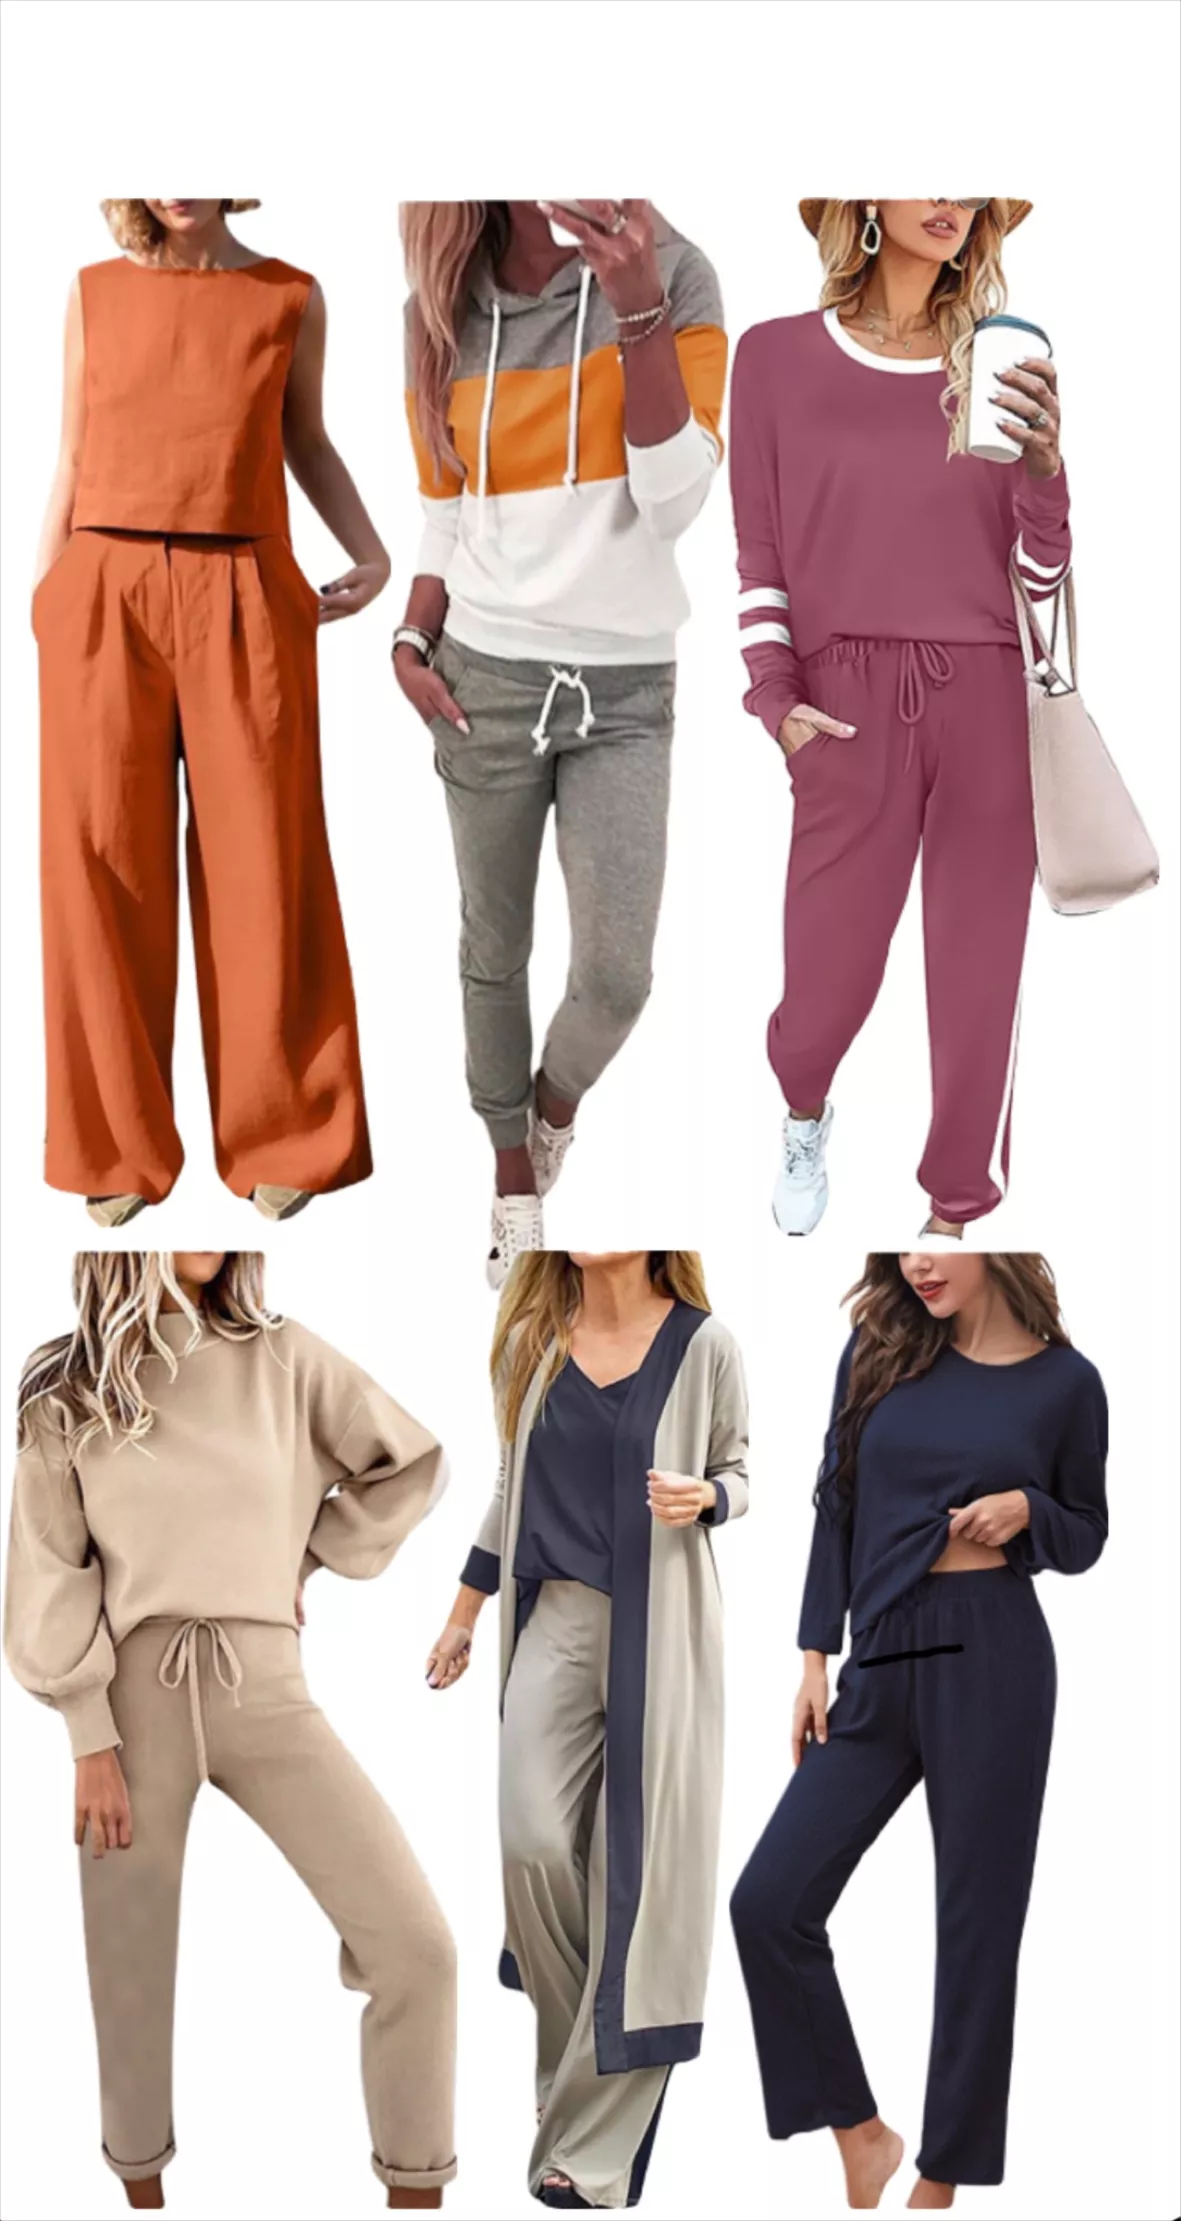 RQYYD Sweatsuits for Women Set 2 Piece Outfits Love Graphic Long